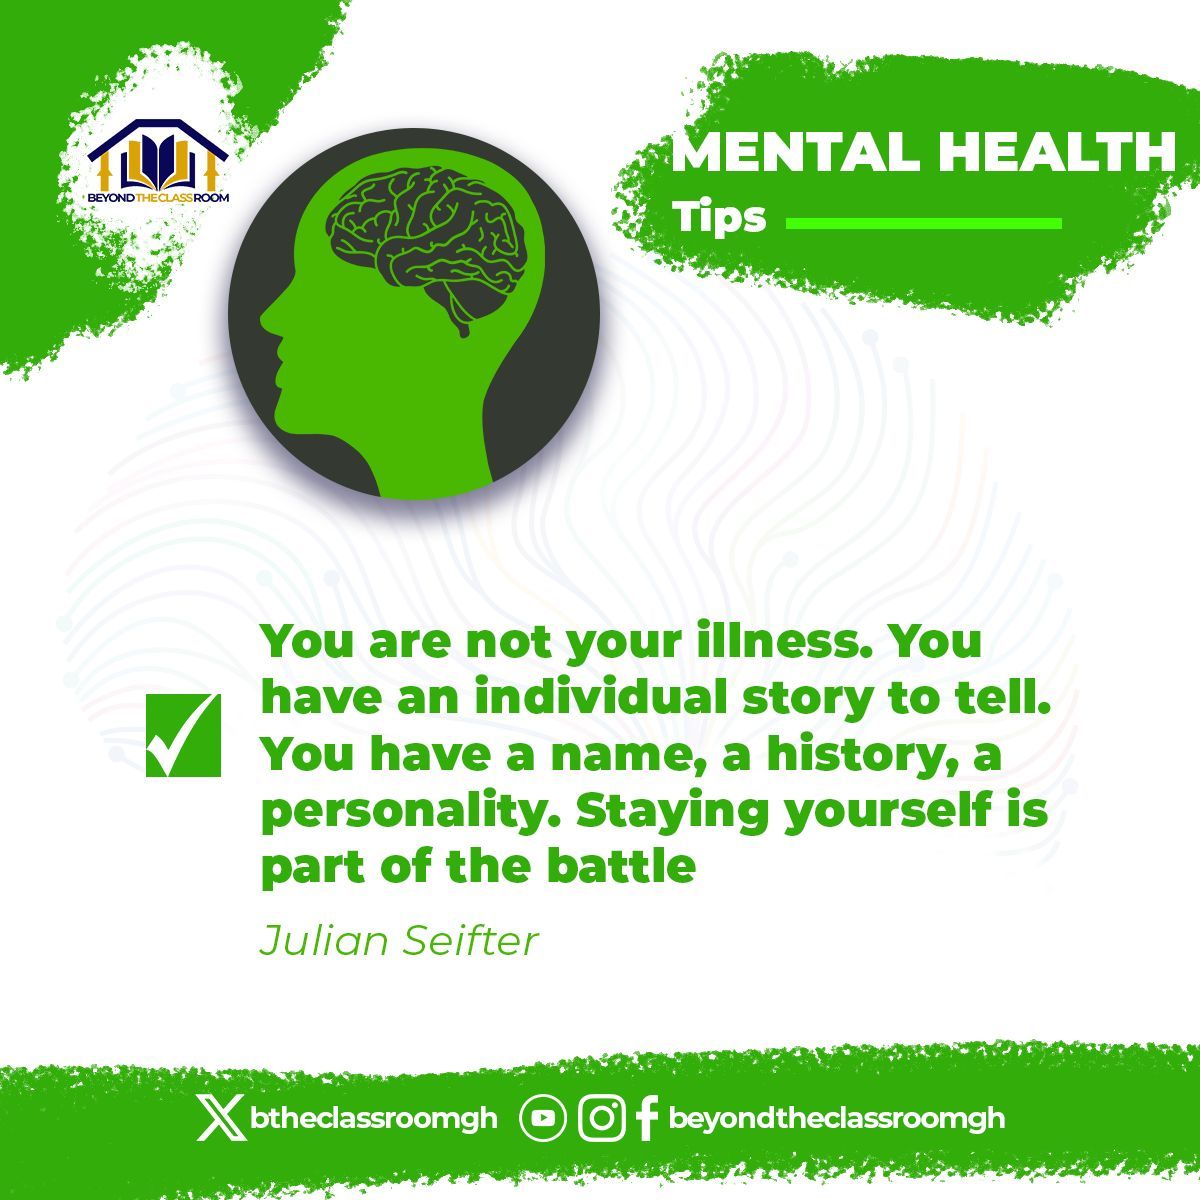 Don't let your illness steal your voice. ️
Share your story, connect with others, and remember, you are not alone. 
#mentalhealthawareness #BeyondTheClassroom #MentalHealthWithBeyondTheClassroom